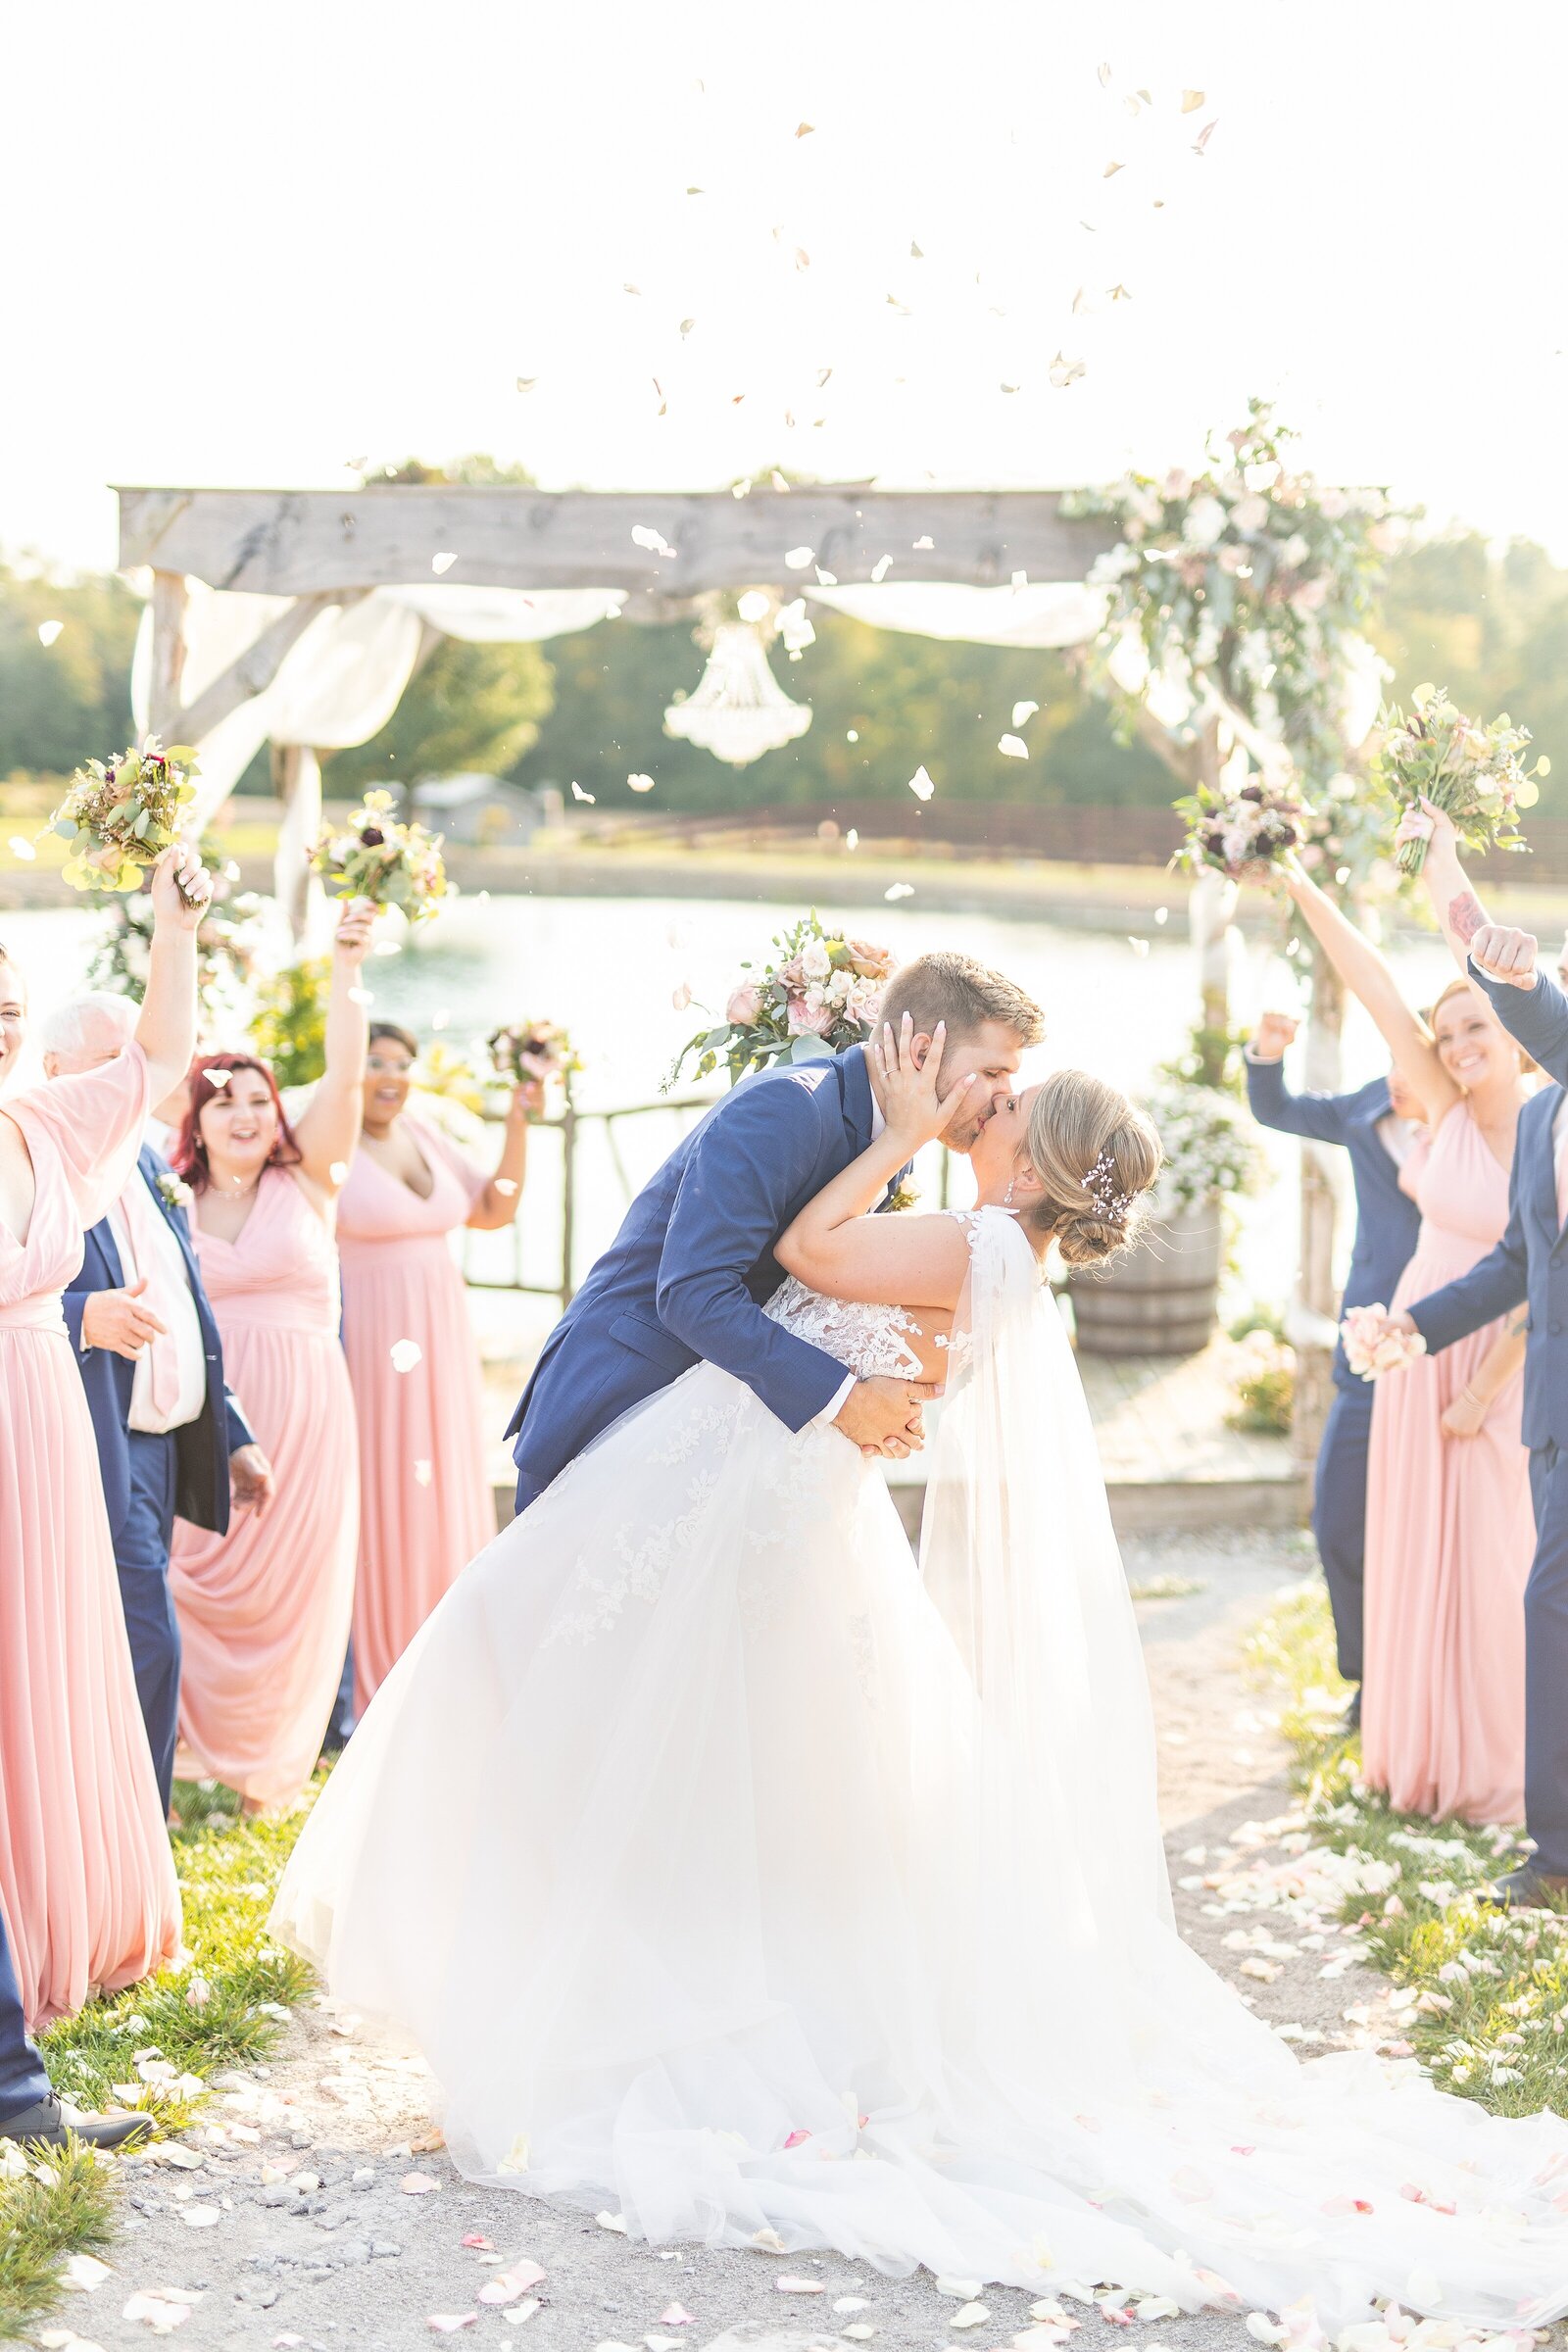 Bride wearing lace A-line gown kissing groom wearing navy suit in front of ceremony arbor with wedding party cheering and throwing white rose petals.